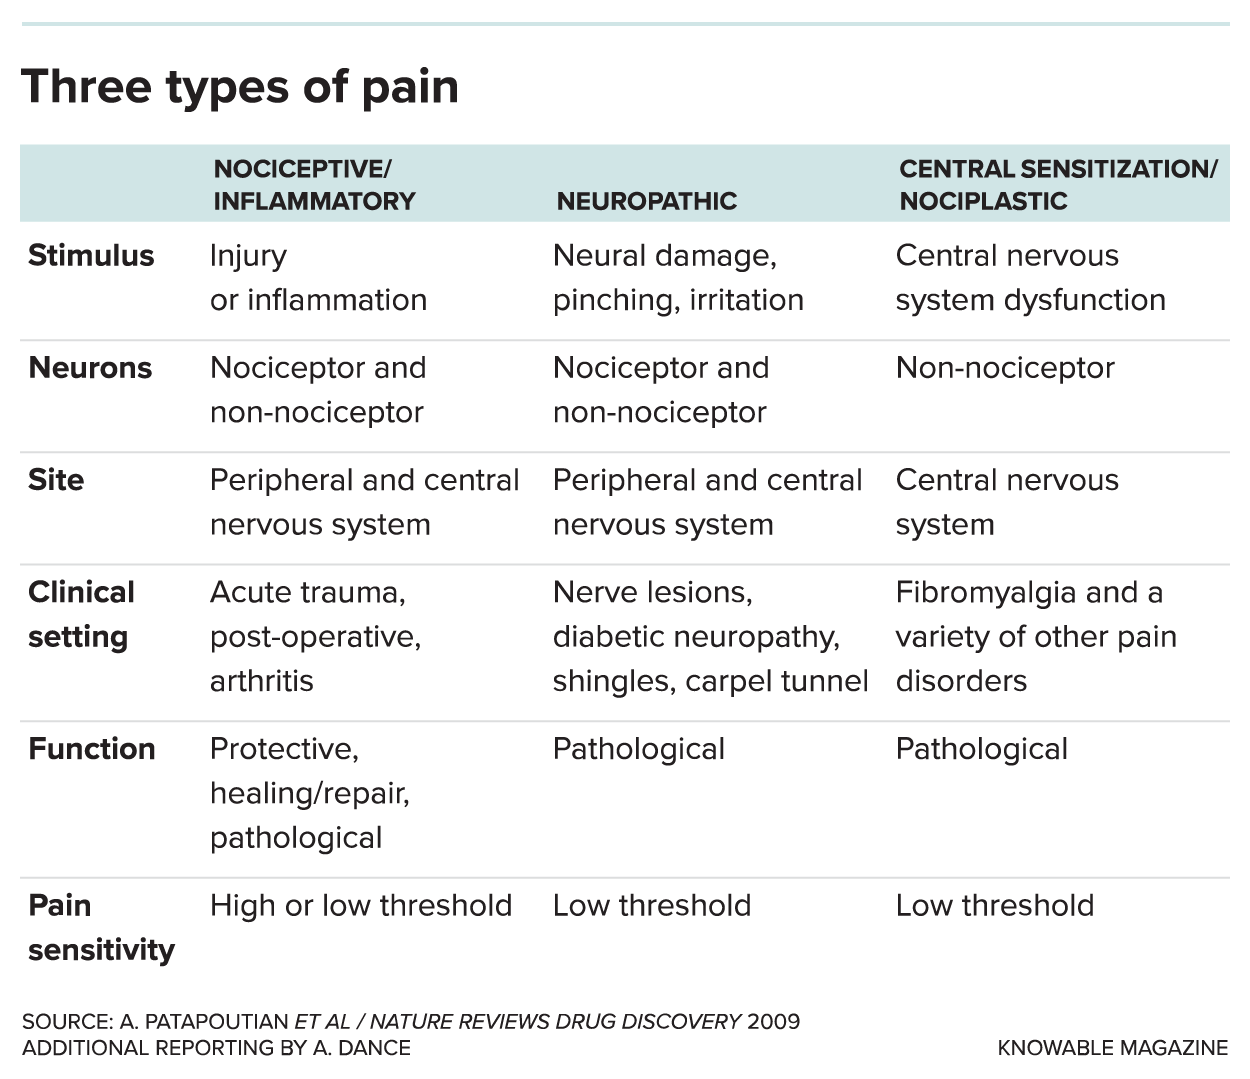 Is pain relief different for different types of pain?